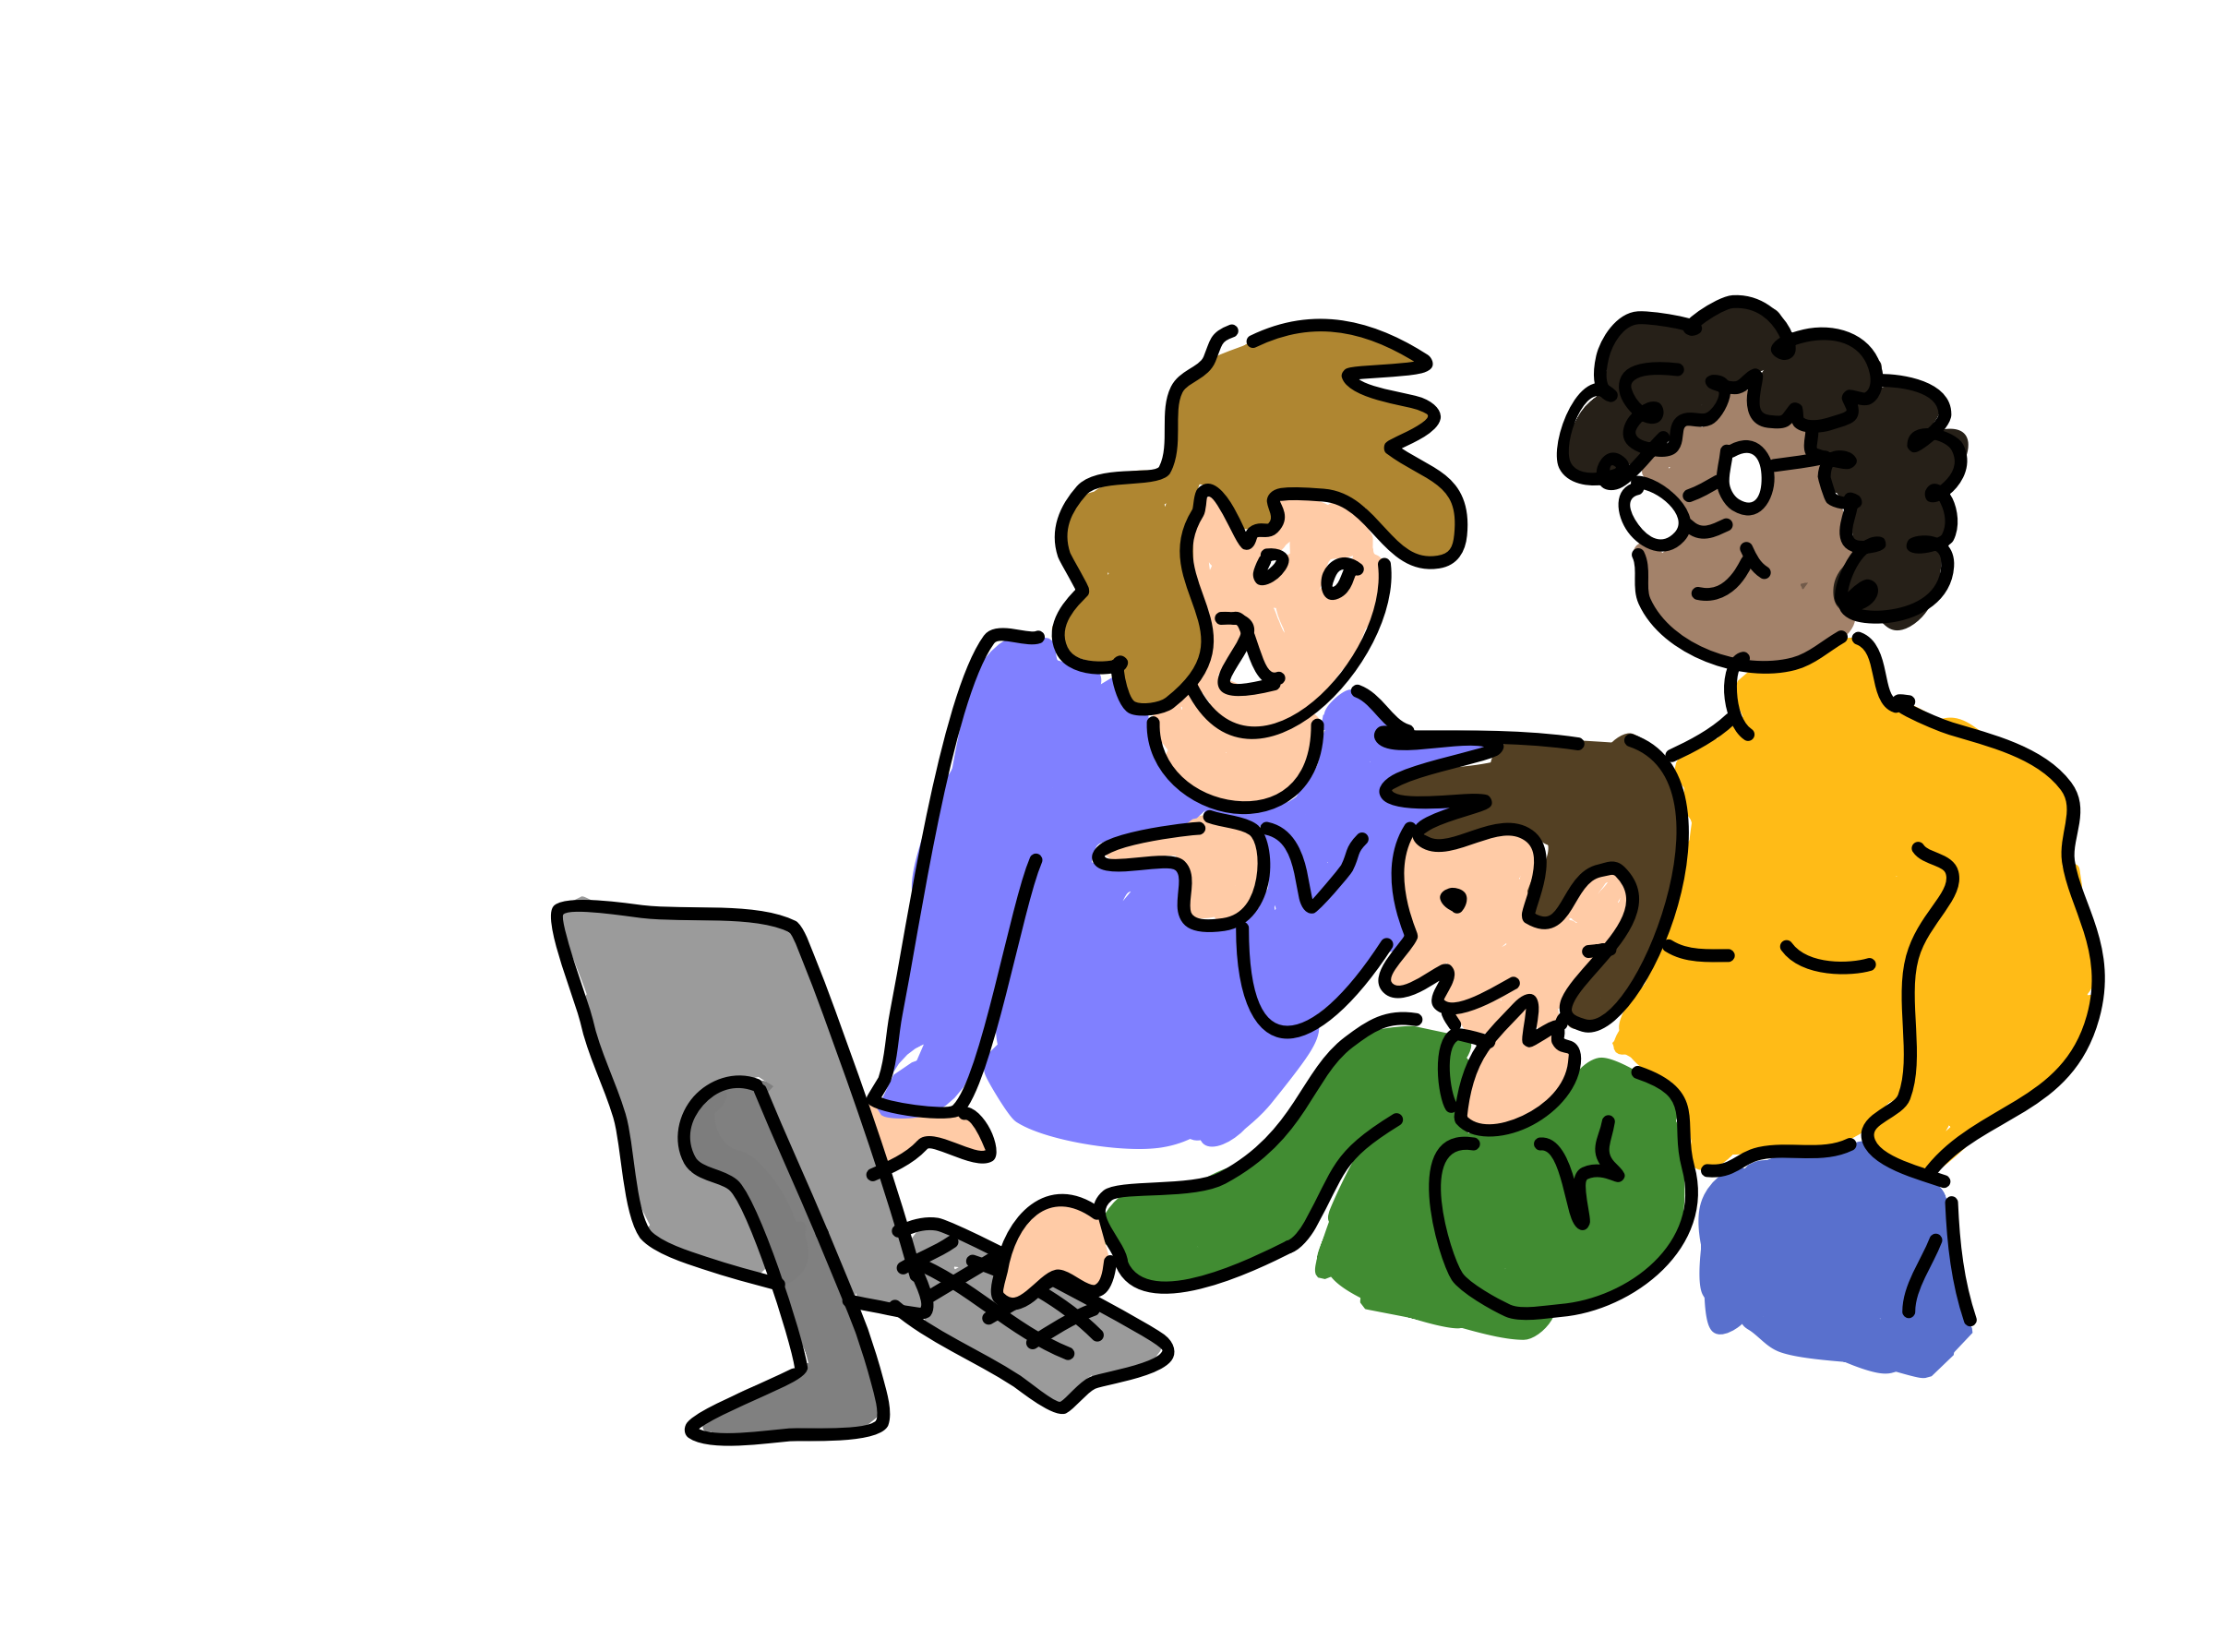 Three people working together vector clipart image.